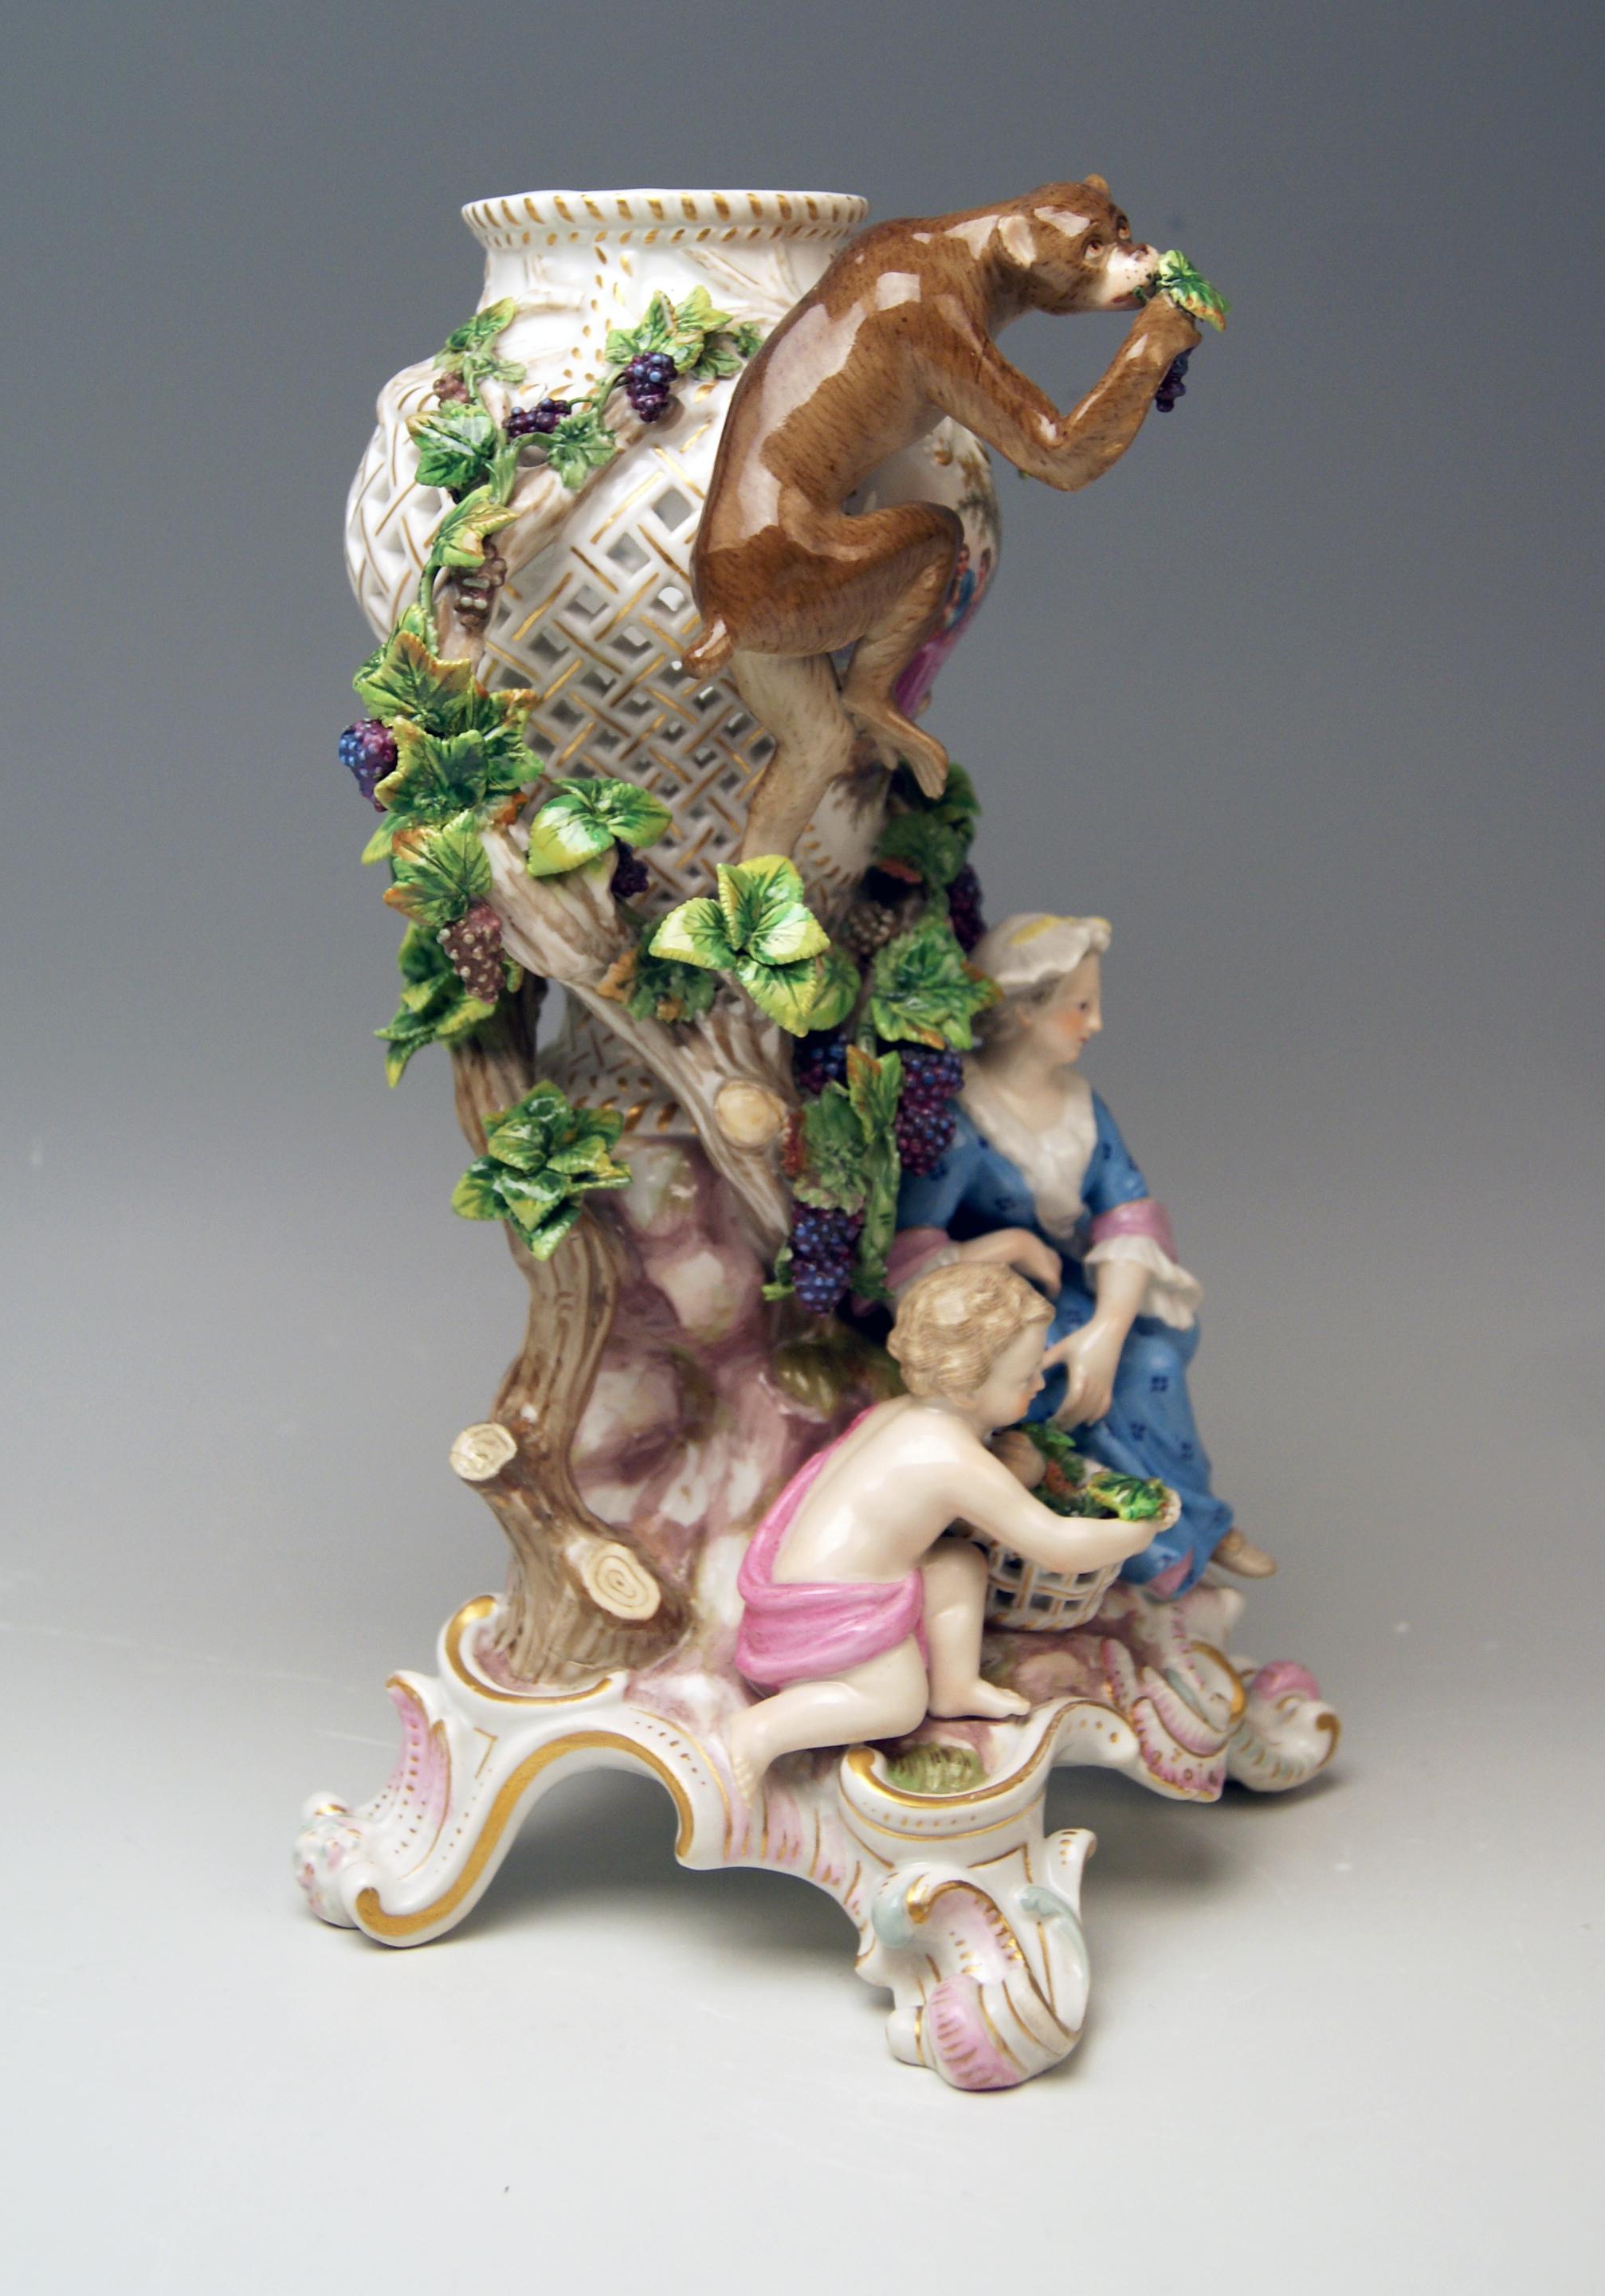 Meissen nice Potpourri vase: Monkey eating wine grapes / lady with boy
The details are stunningly scupltured = finest modelling!

Design:
Johann Friedrich Eberlein (1696-1749) / Model 1002 Created 1748.
Since 1735 second chief modeller of